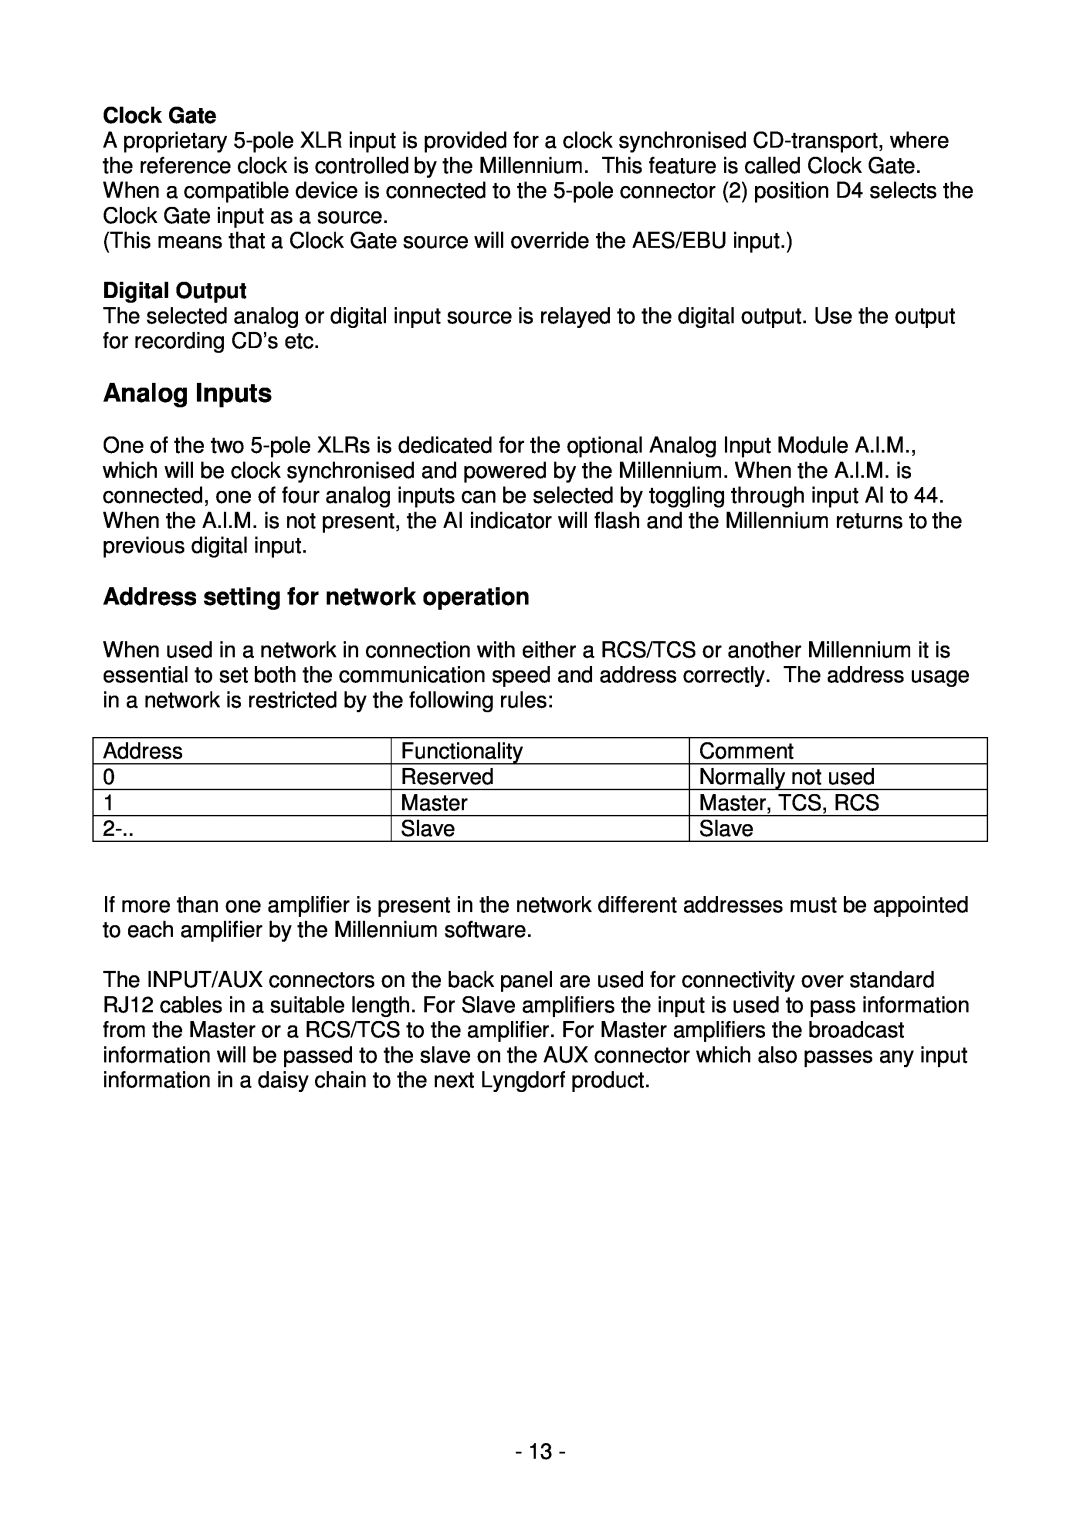 Lyngdorf Audio MkIV owner manual Analog Inputs, Address setting for network operation 